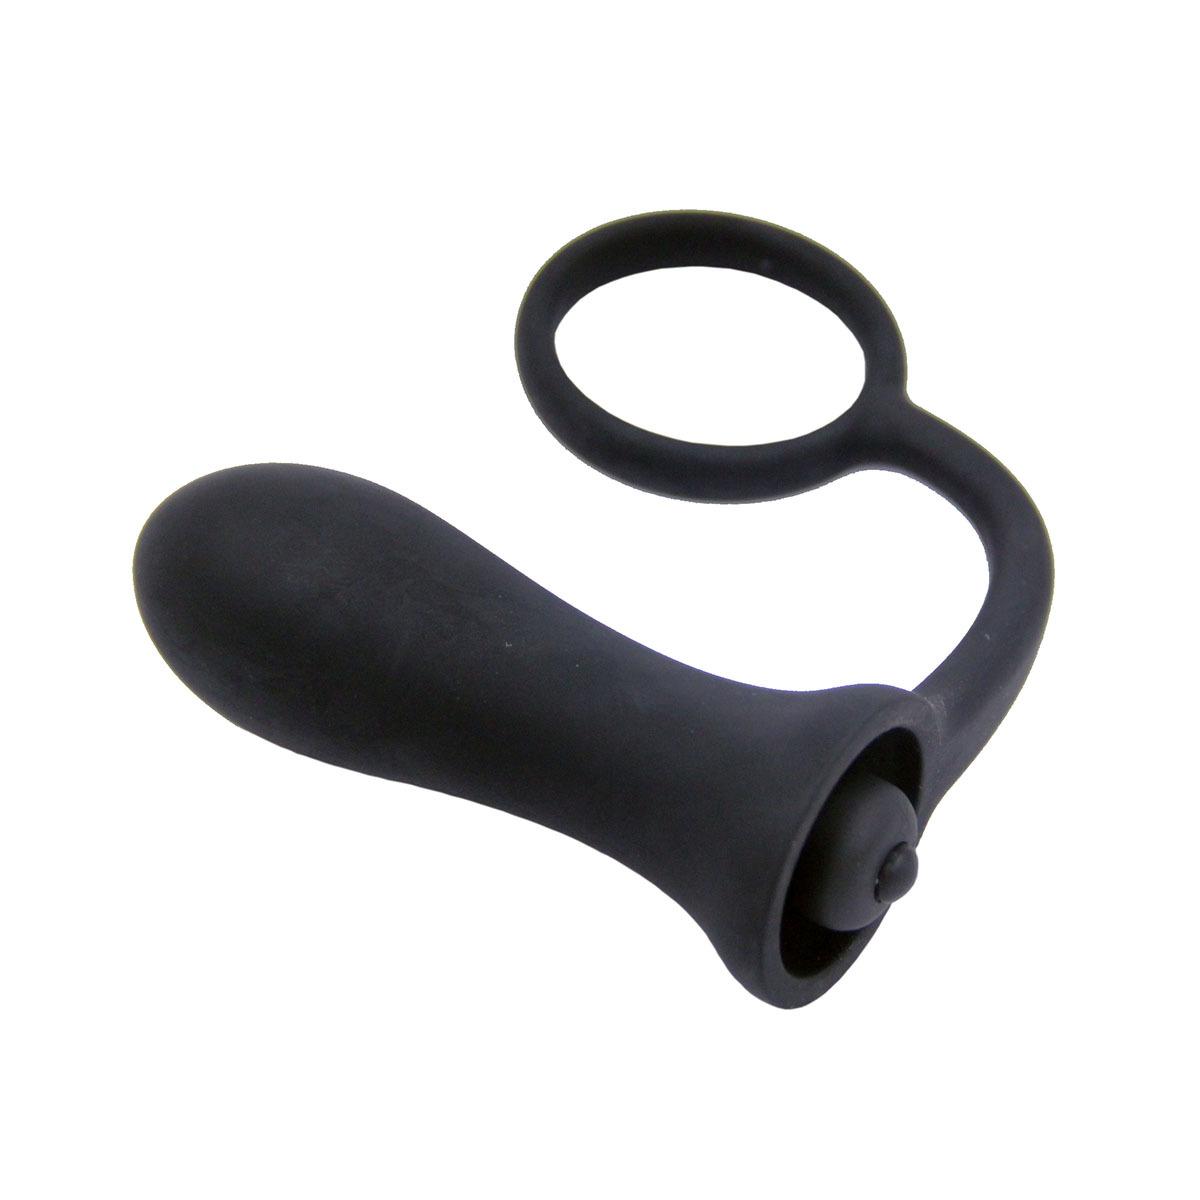 New 10 frequency vibration, silicone wearing anal plug for men and women